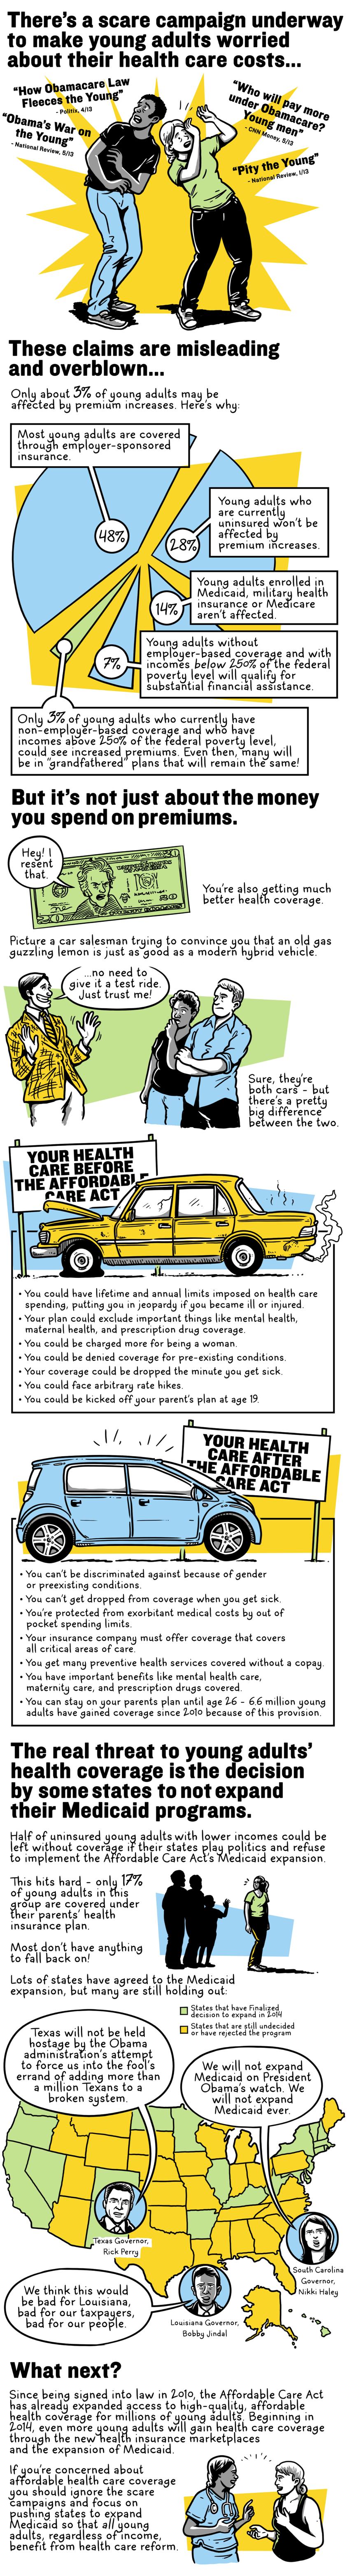 obamacare young people infographic